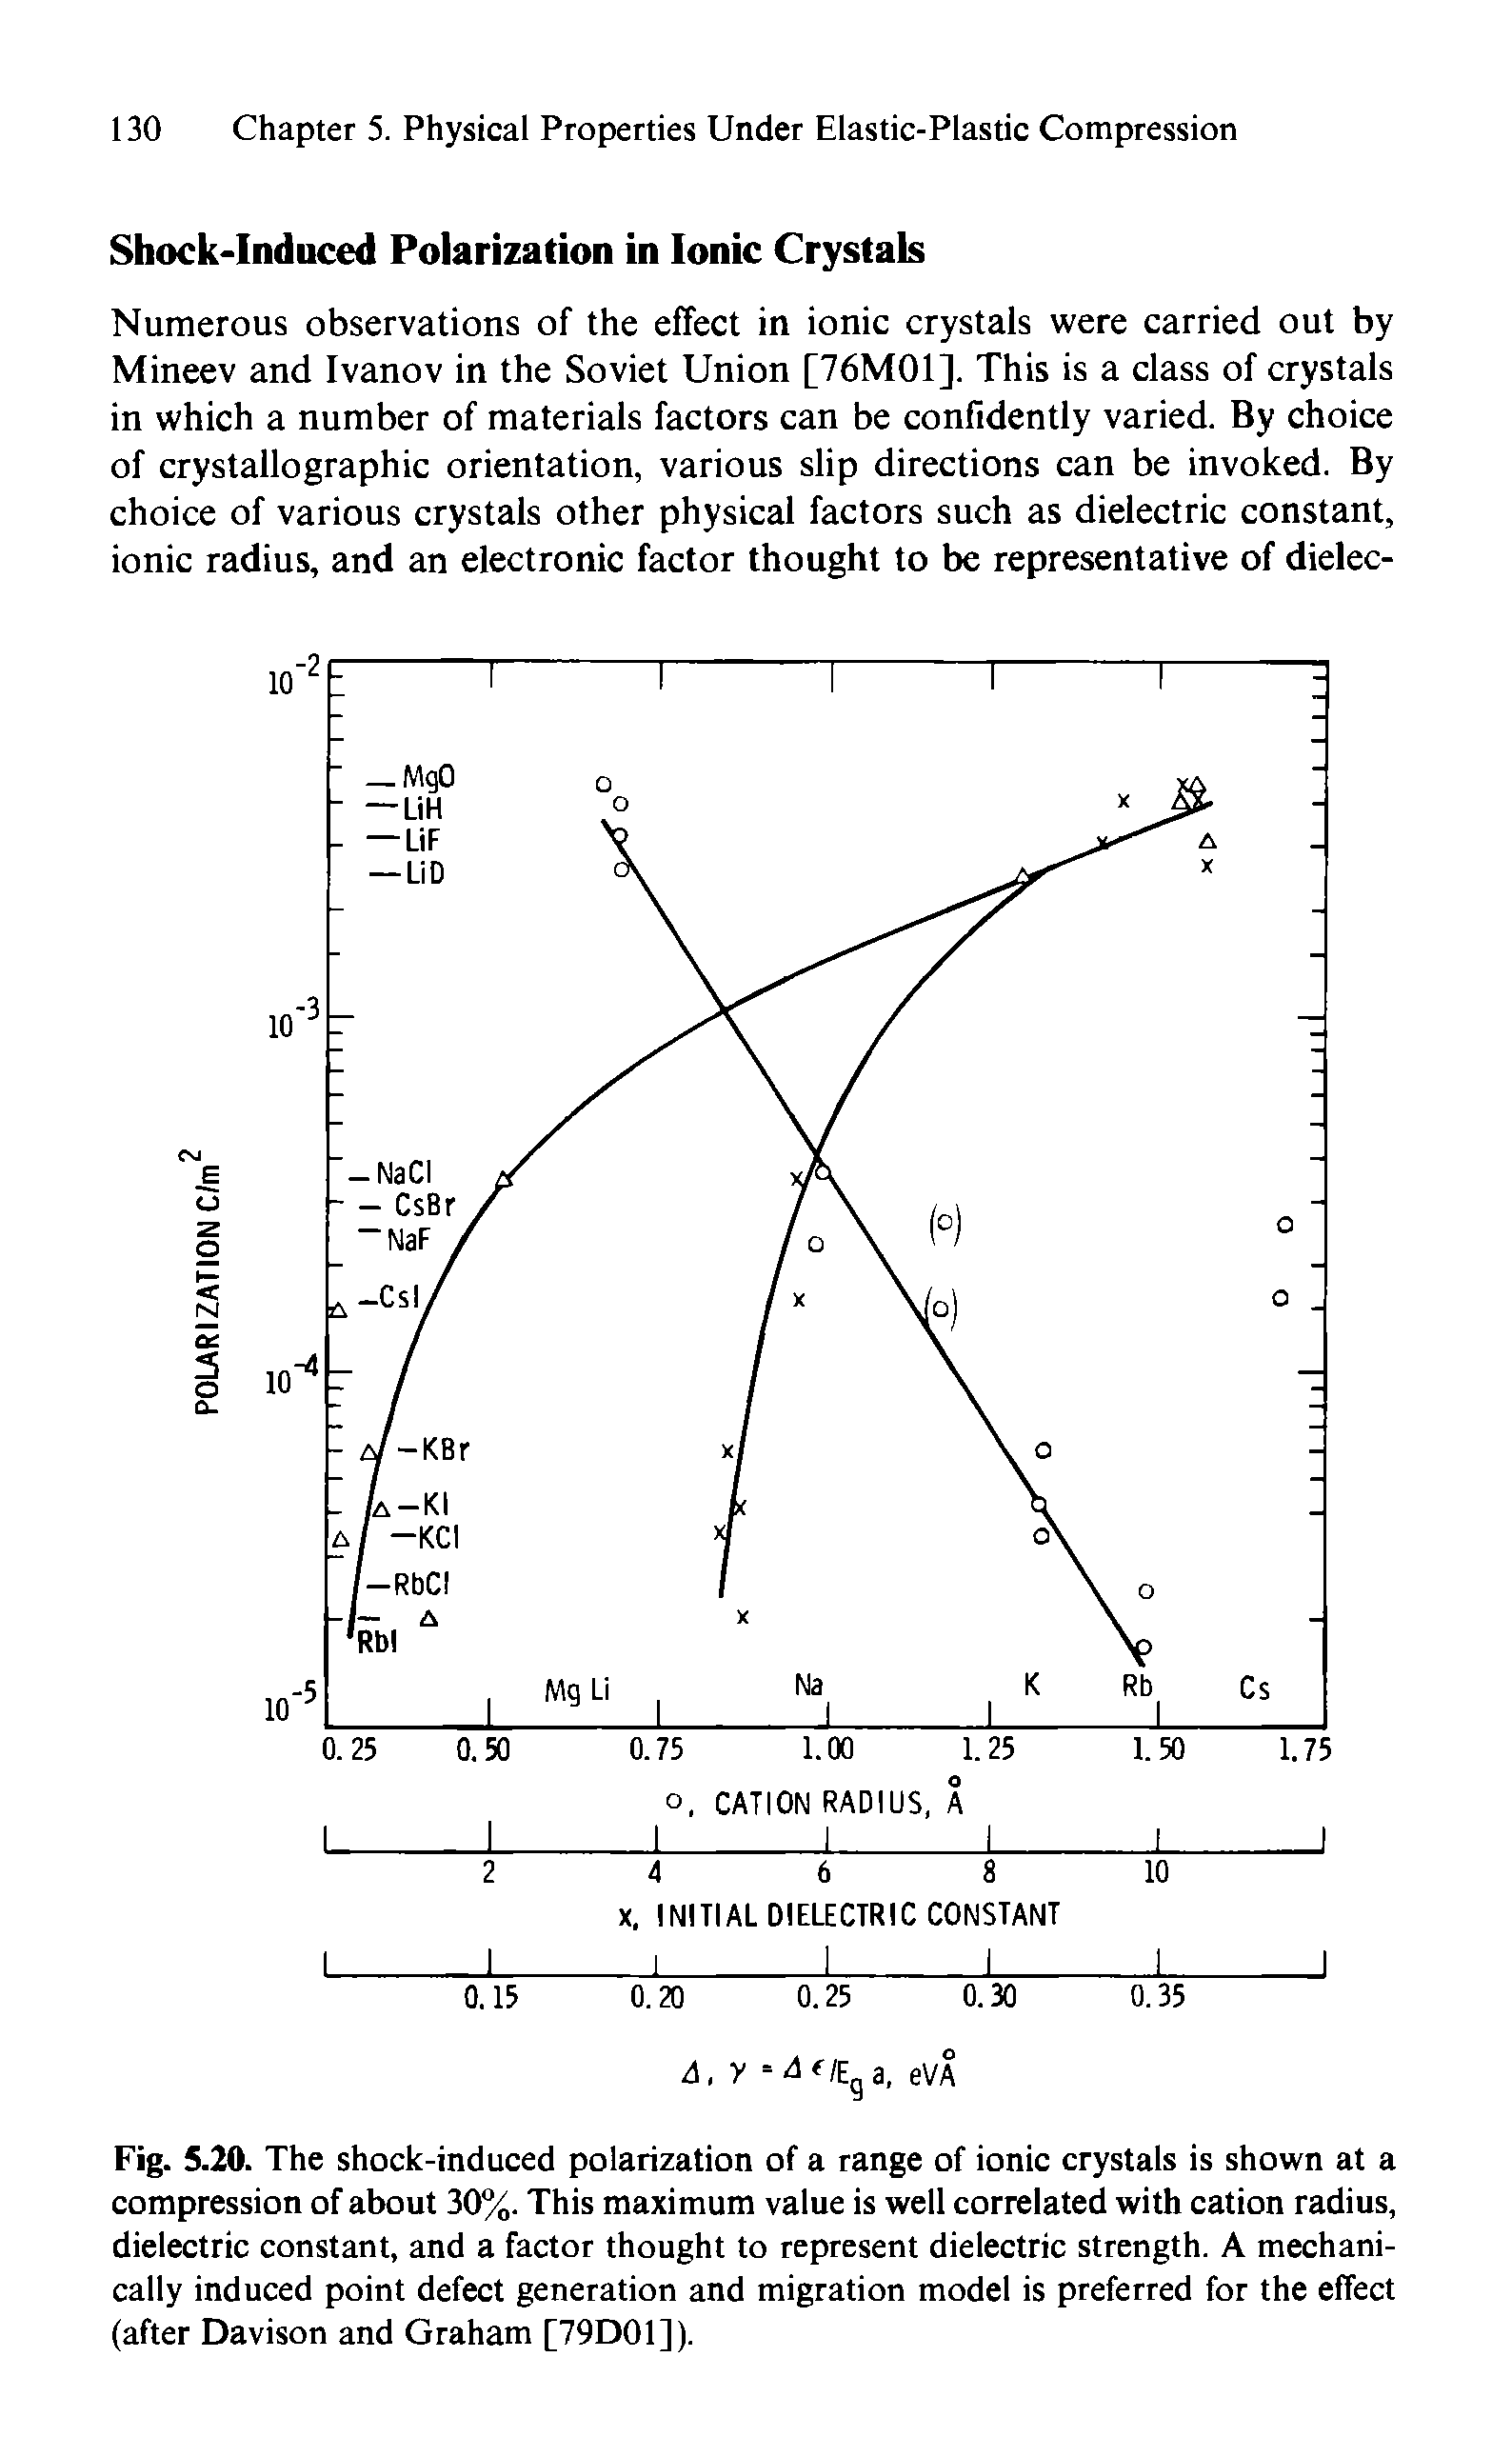 Fig. 5.20. The shock-induced polarization of a range of ionic crystals is shown at a compression of about 30%. This maximum value is well correlated with cation radius, dielectric constant, and a factor thought to represent dielectric strength. A mechanically induced point defect generation and migration model is preferred for the effect (after Davison and Graham [79D01]).